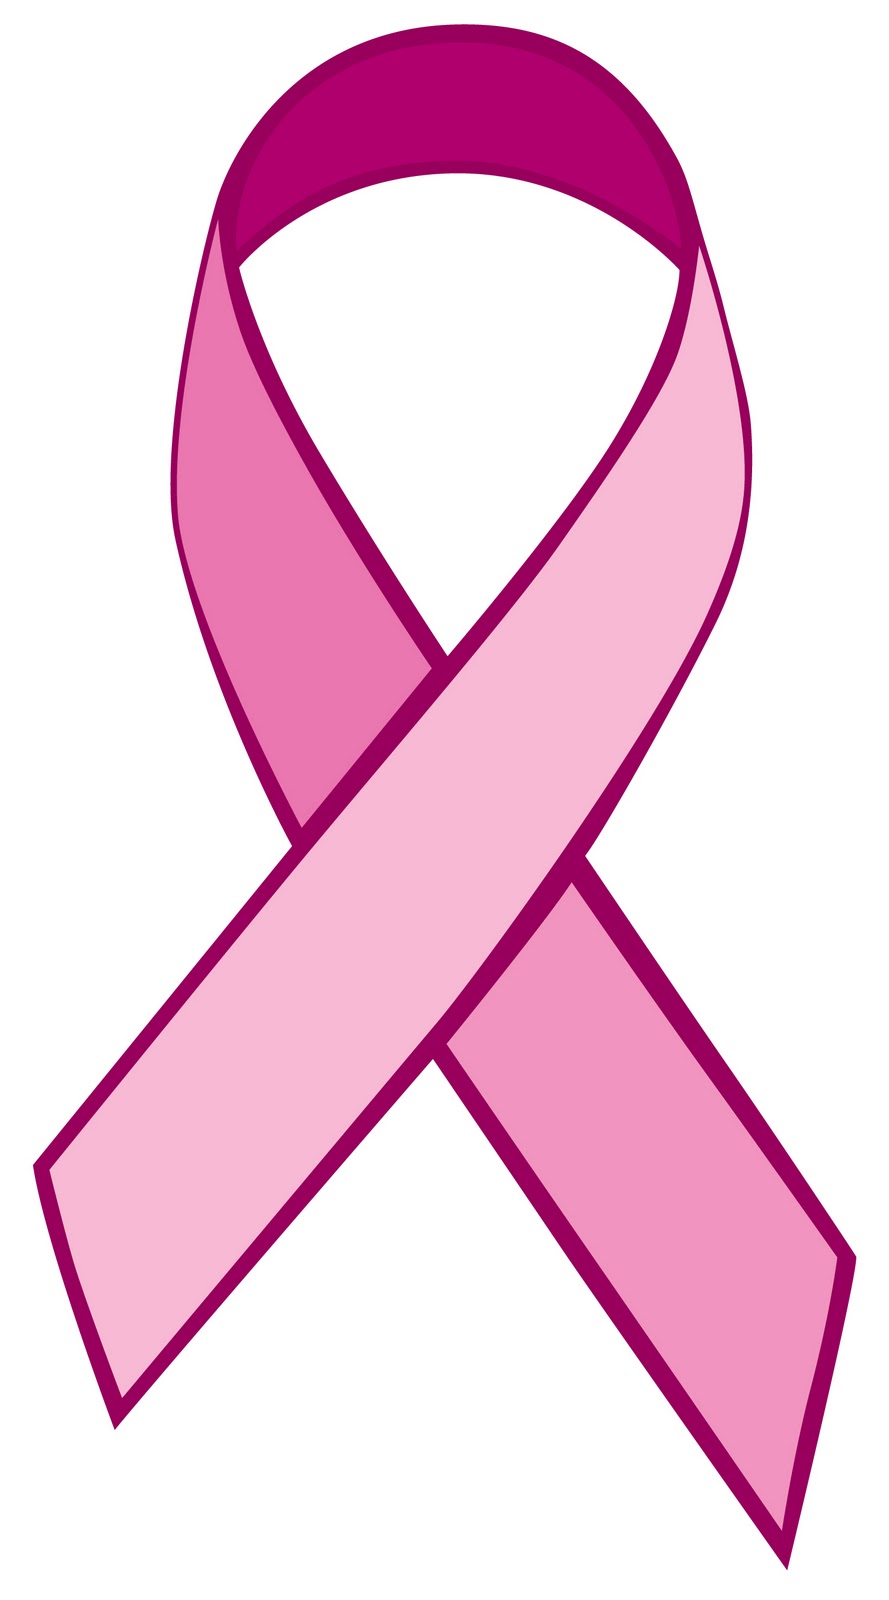 Breast Cancer Ribbon Clipart Free Cliparts That You Can Download To